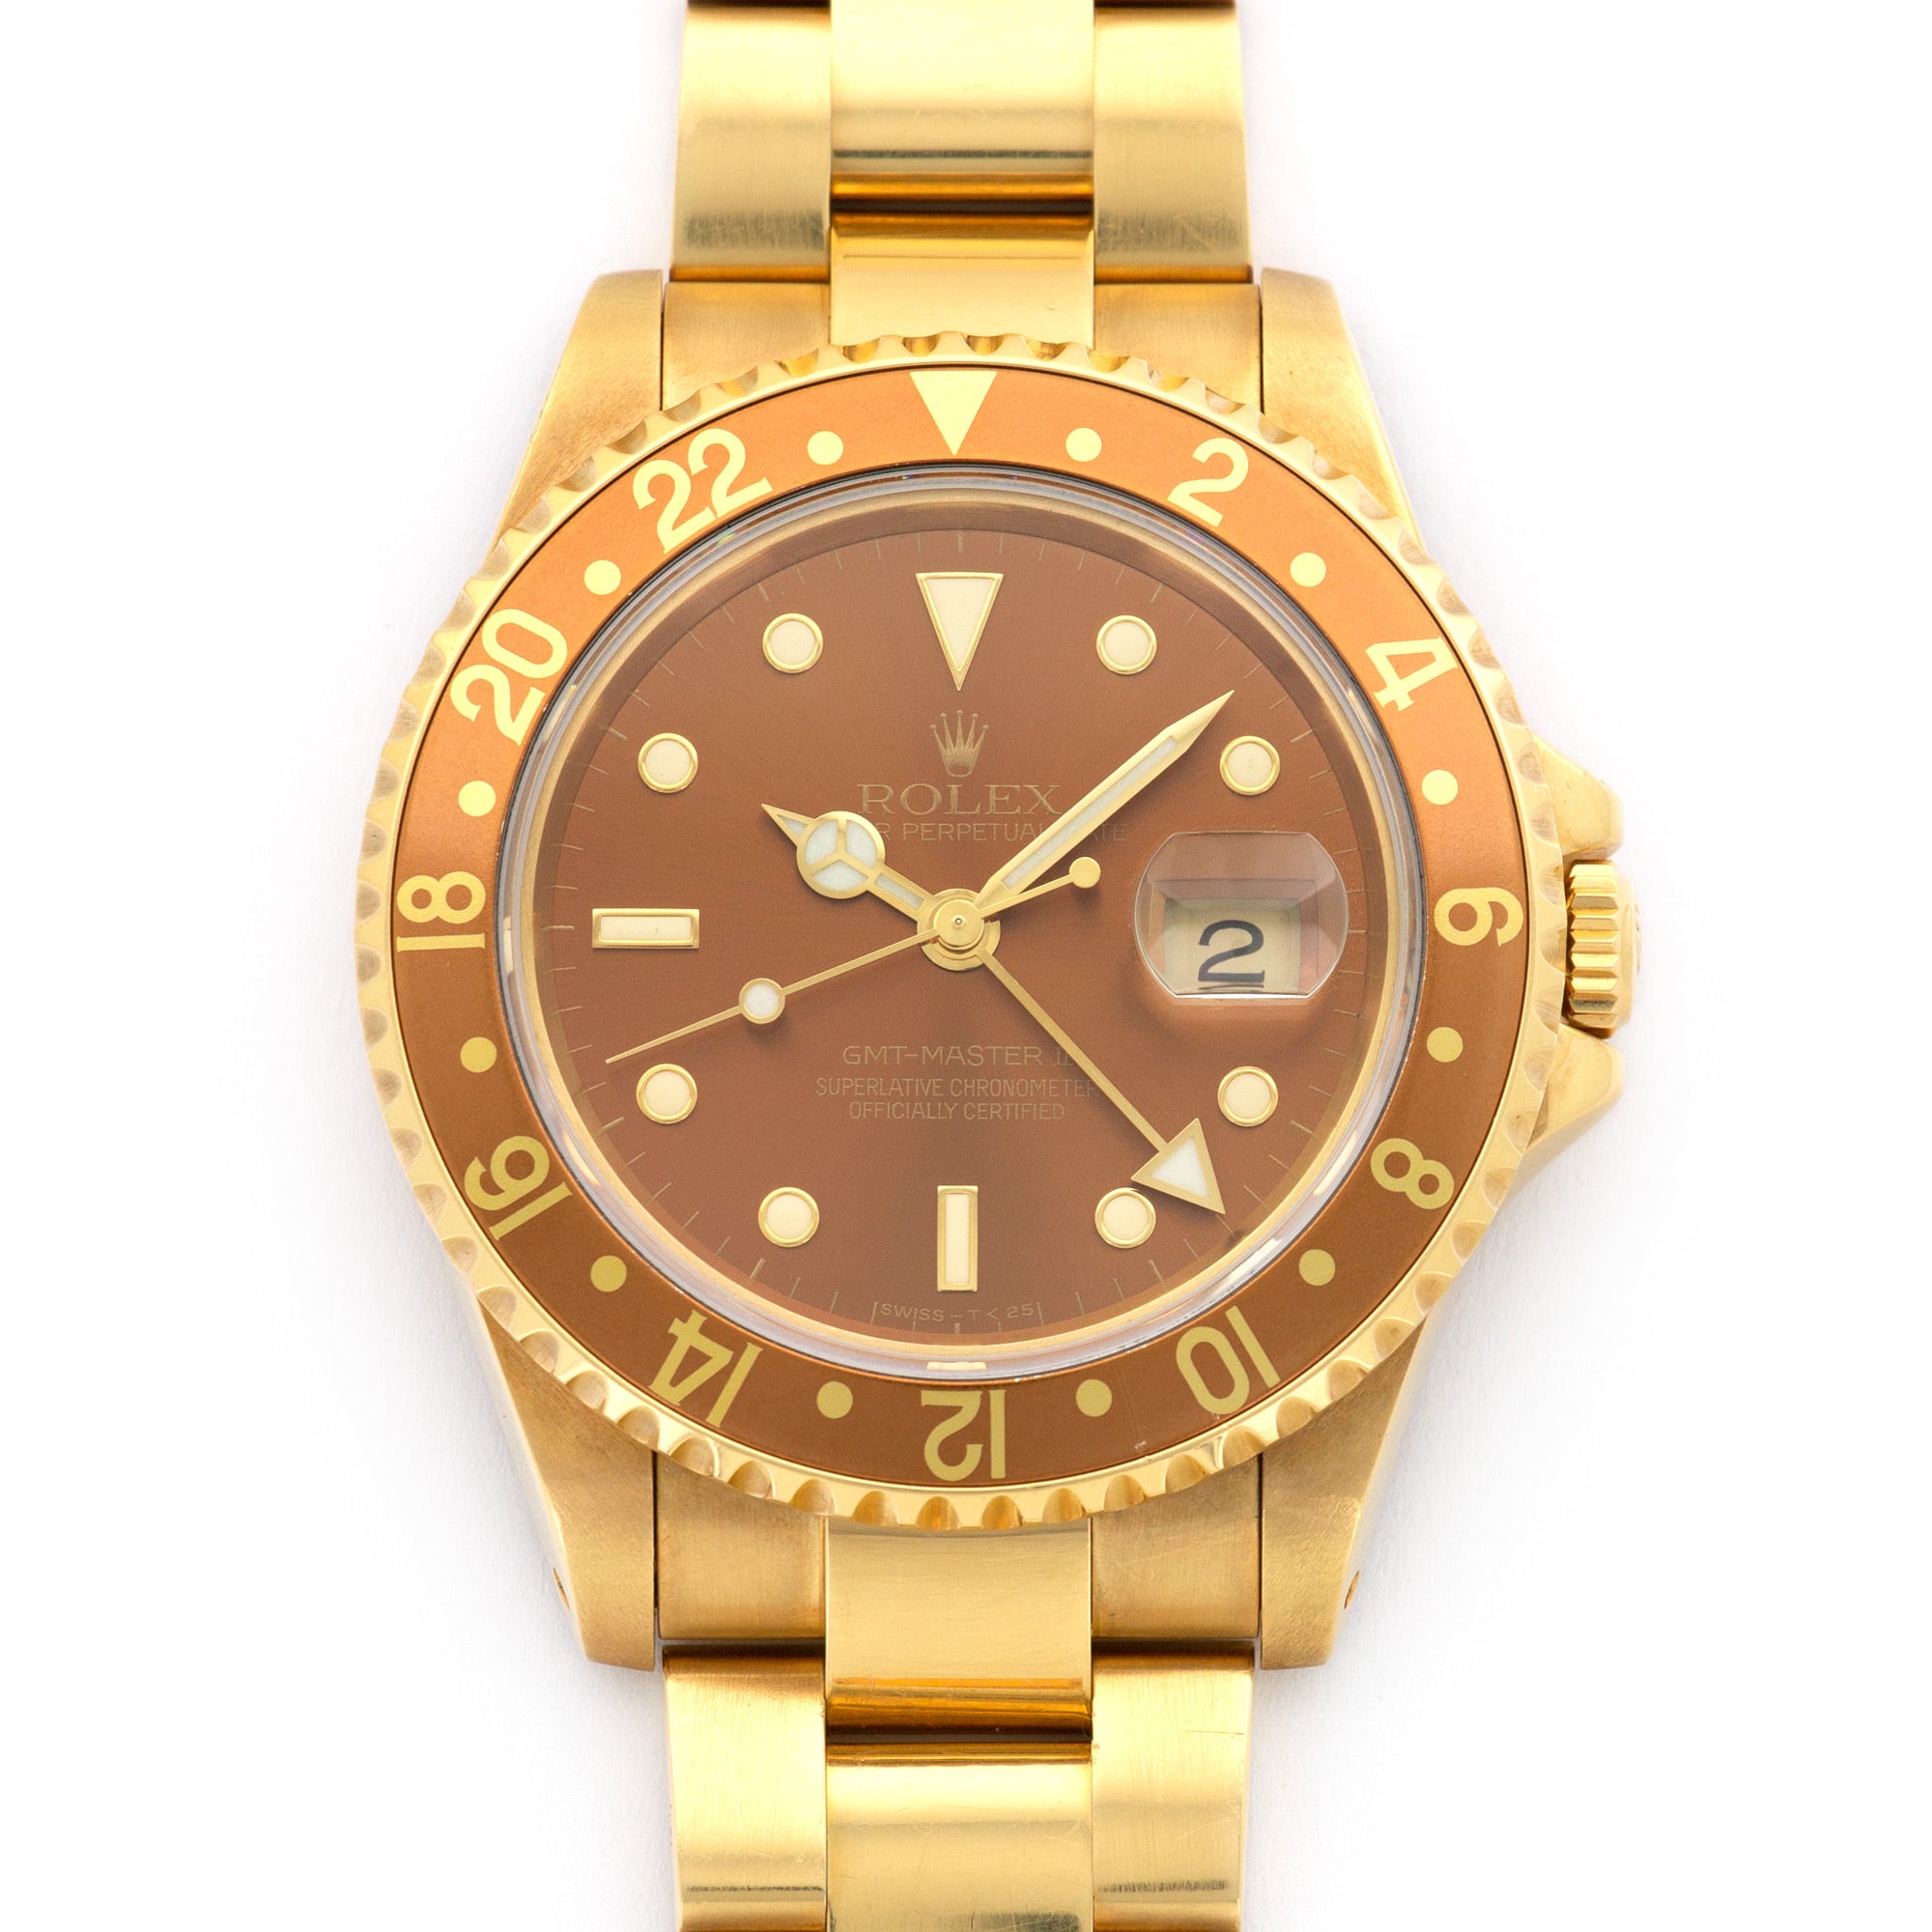 Rolex - Rolex Yellow Gold Root Beer GMT-Master II Watch Ref. 16718 - The Keystone Watches